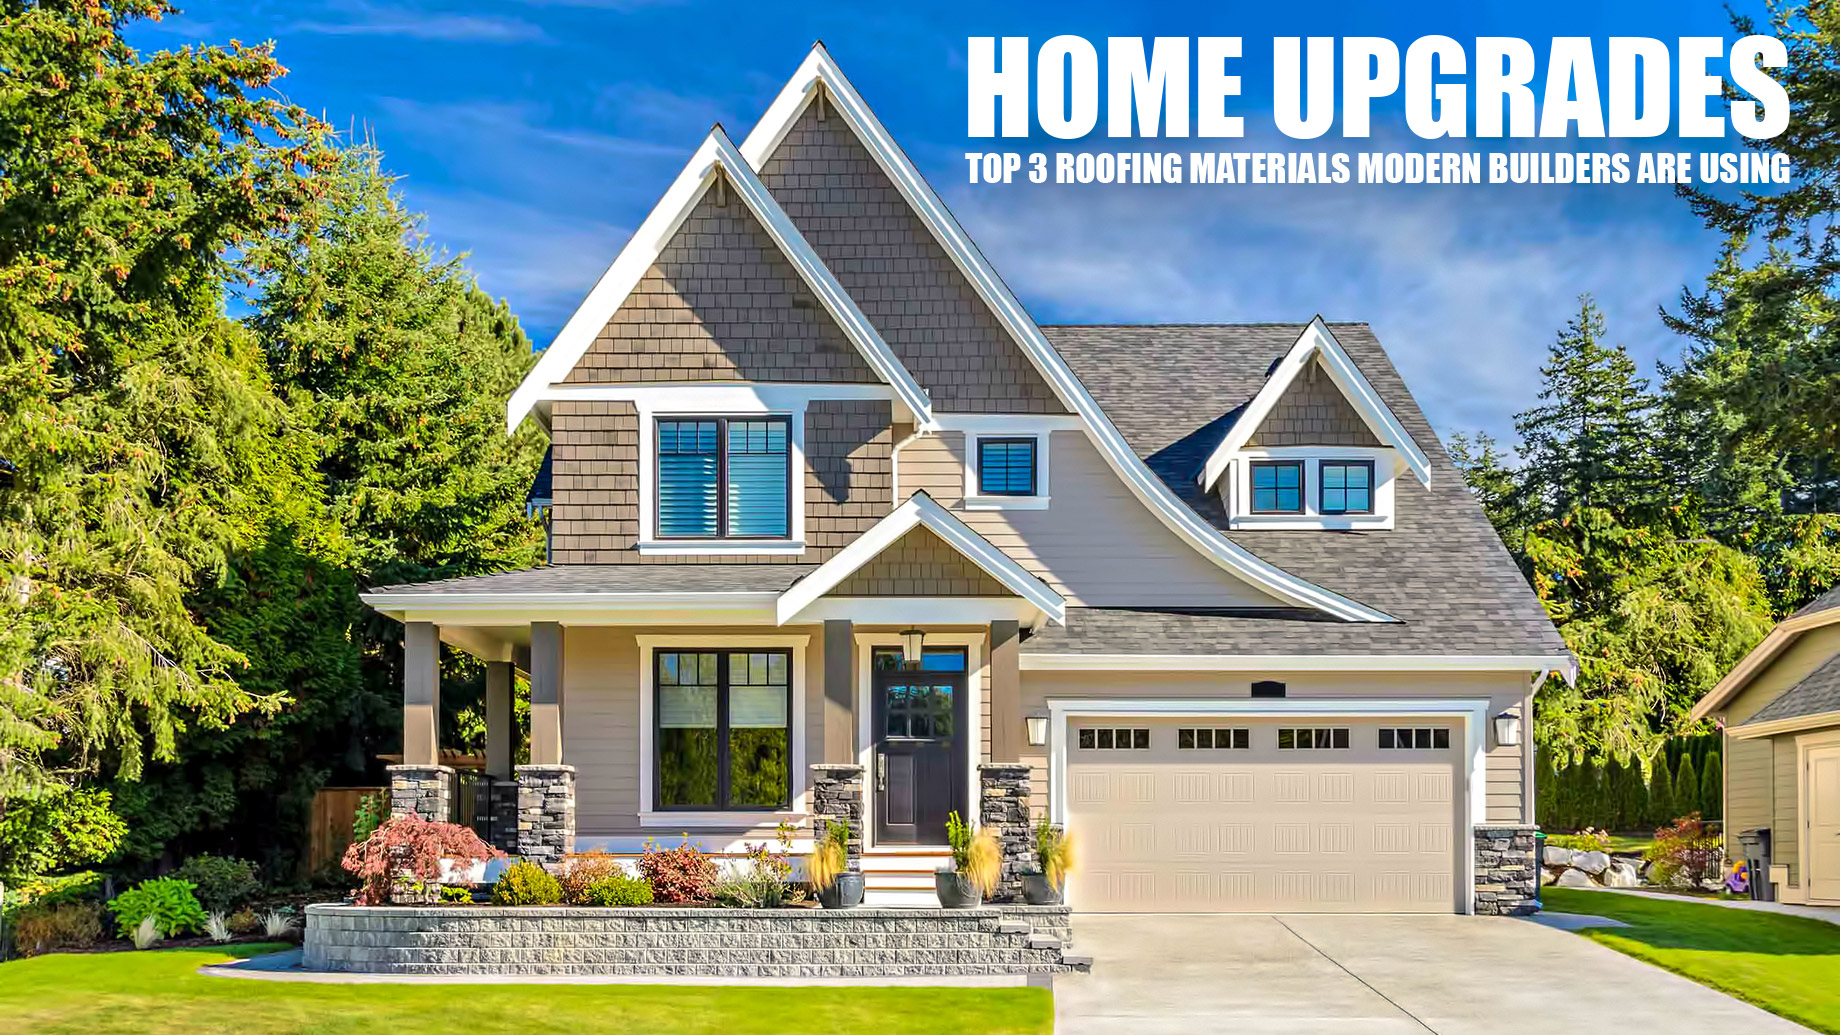 Home Upgrades – Top 3 Roofing Materials Modern Builders Are Using